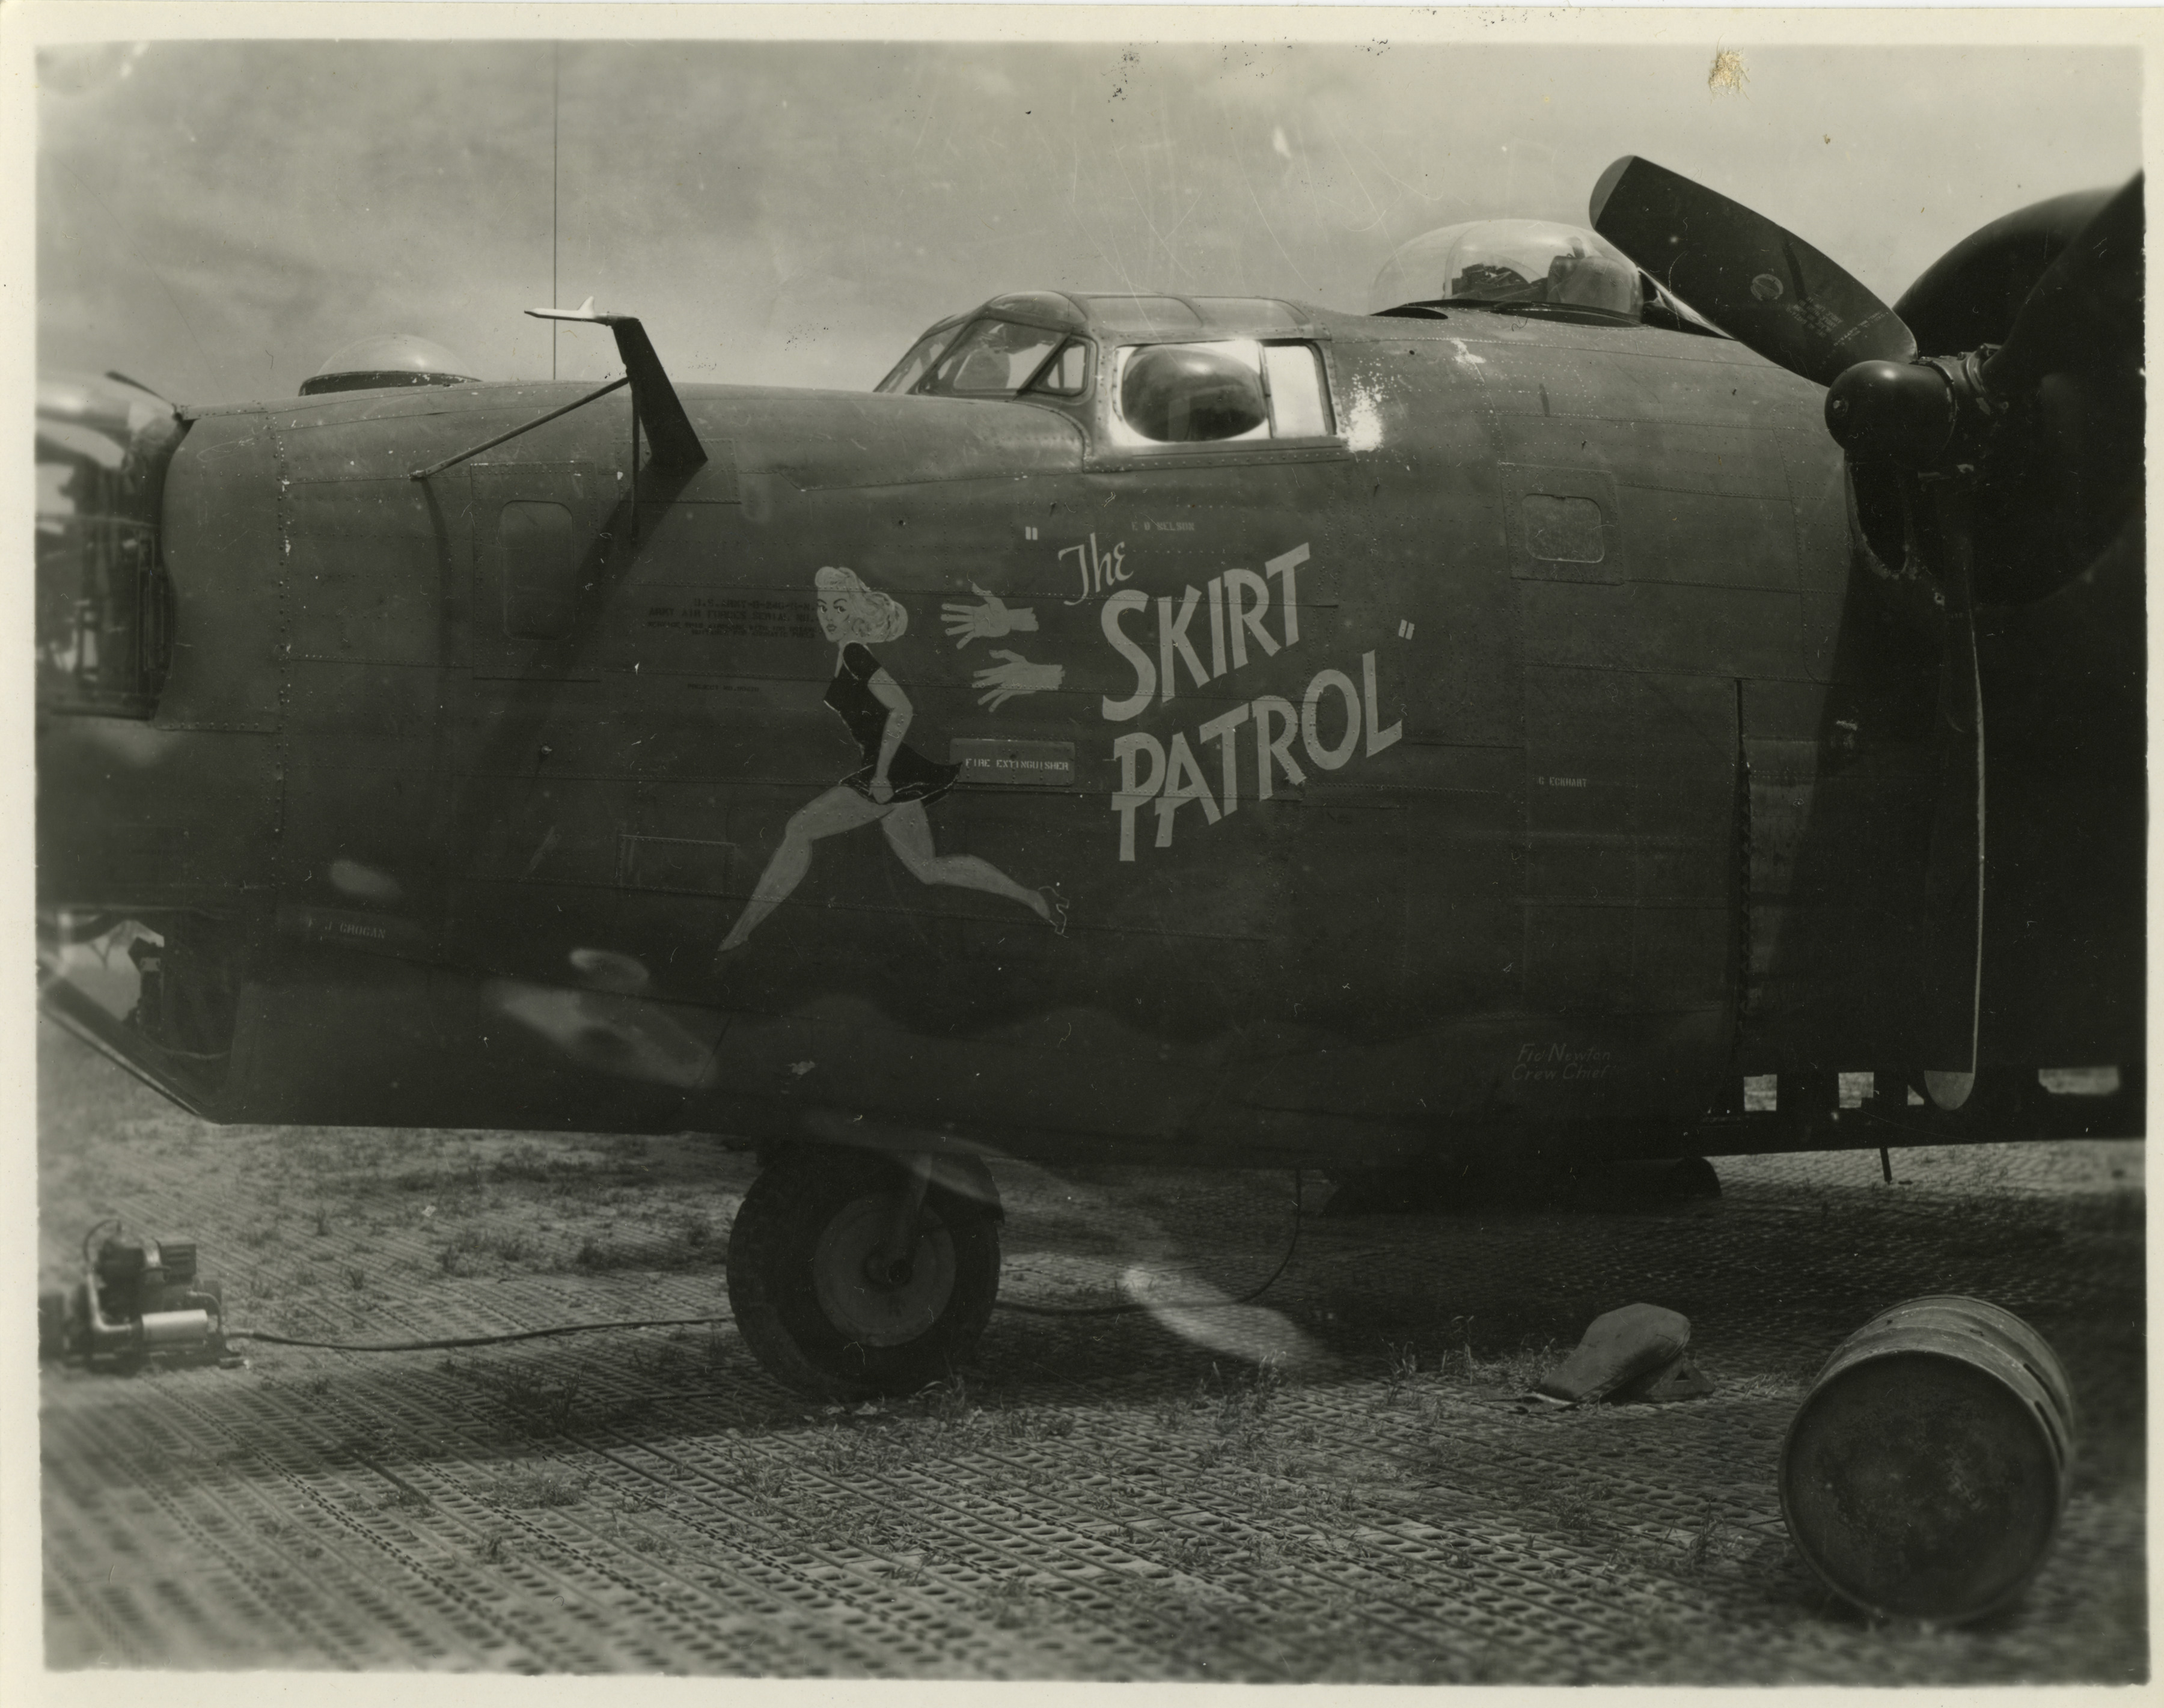 B-24 nose art from the 778th Bombardment Squadron in Italy | The ...